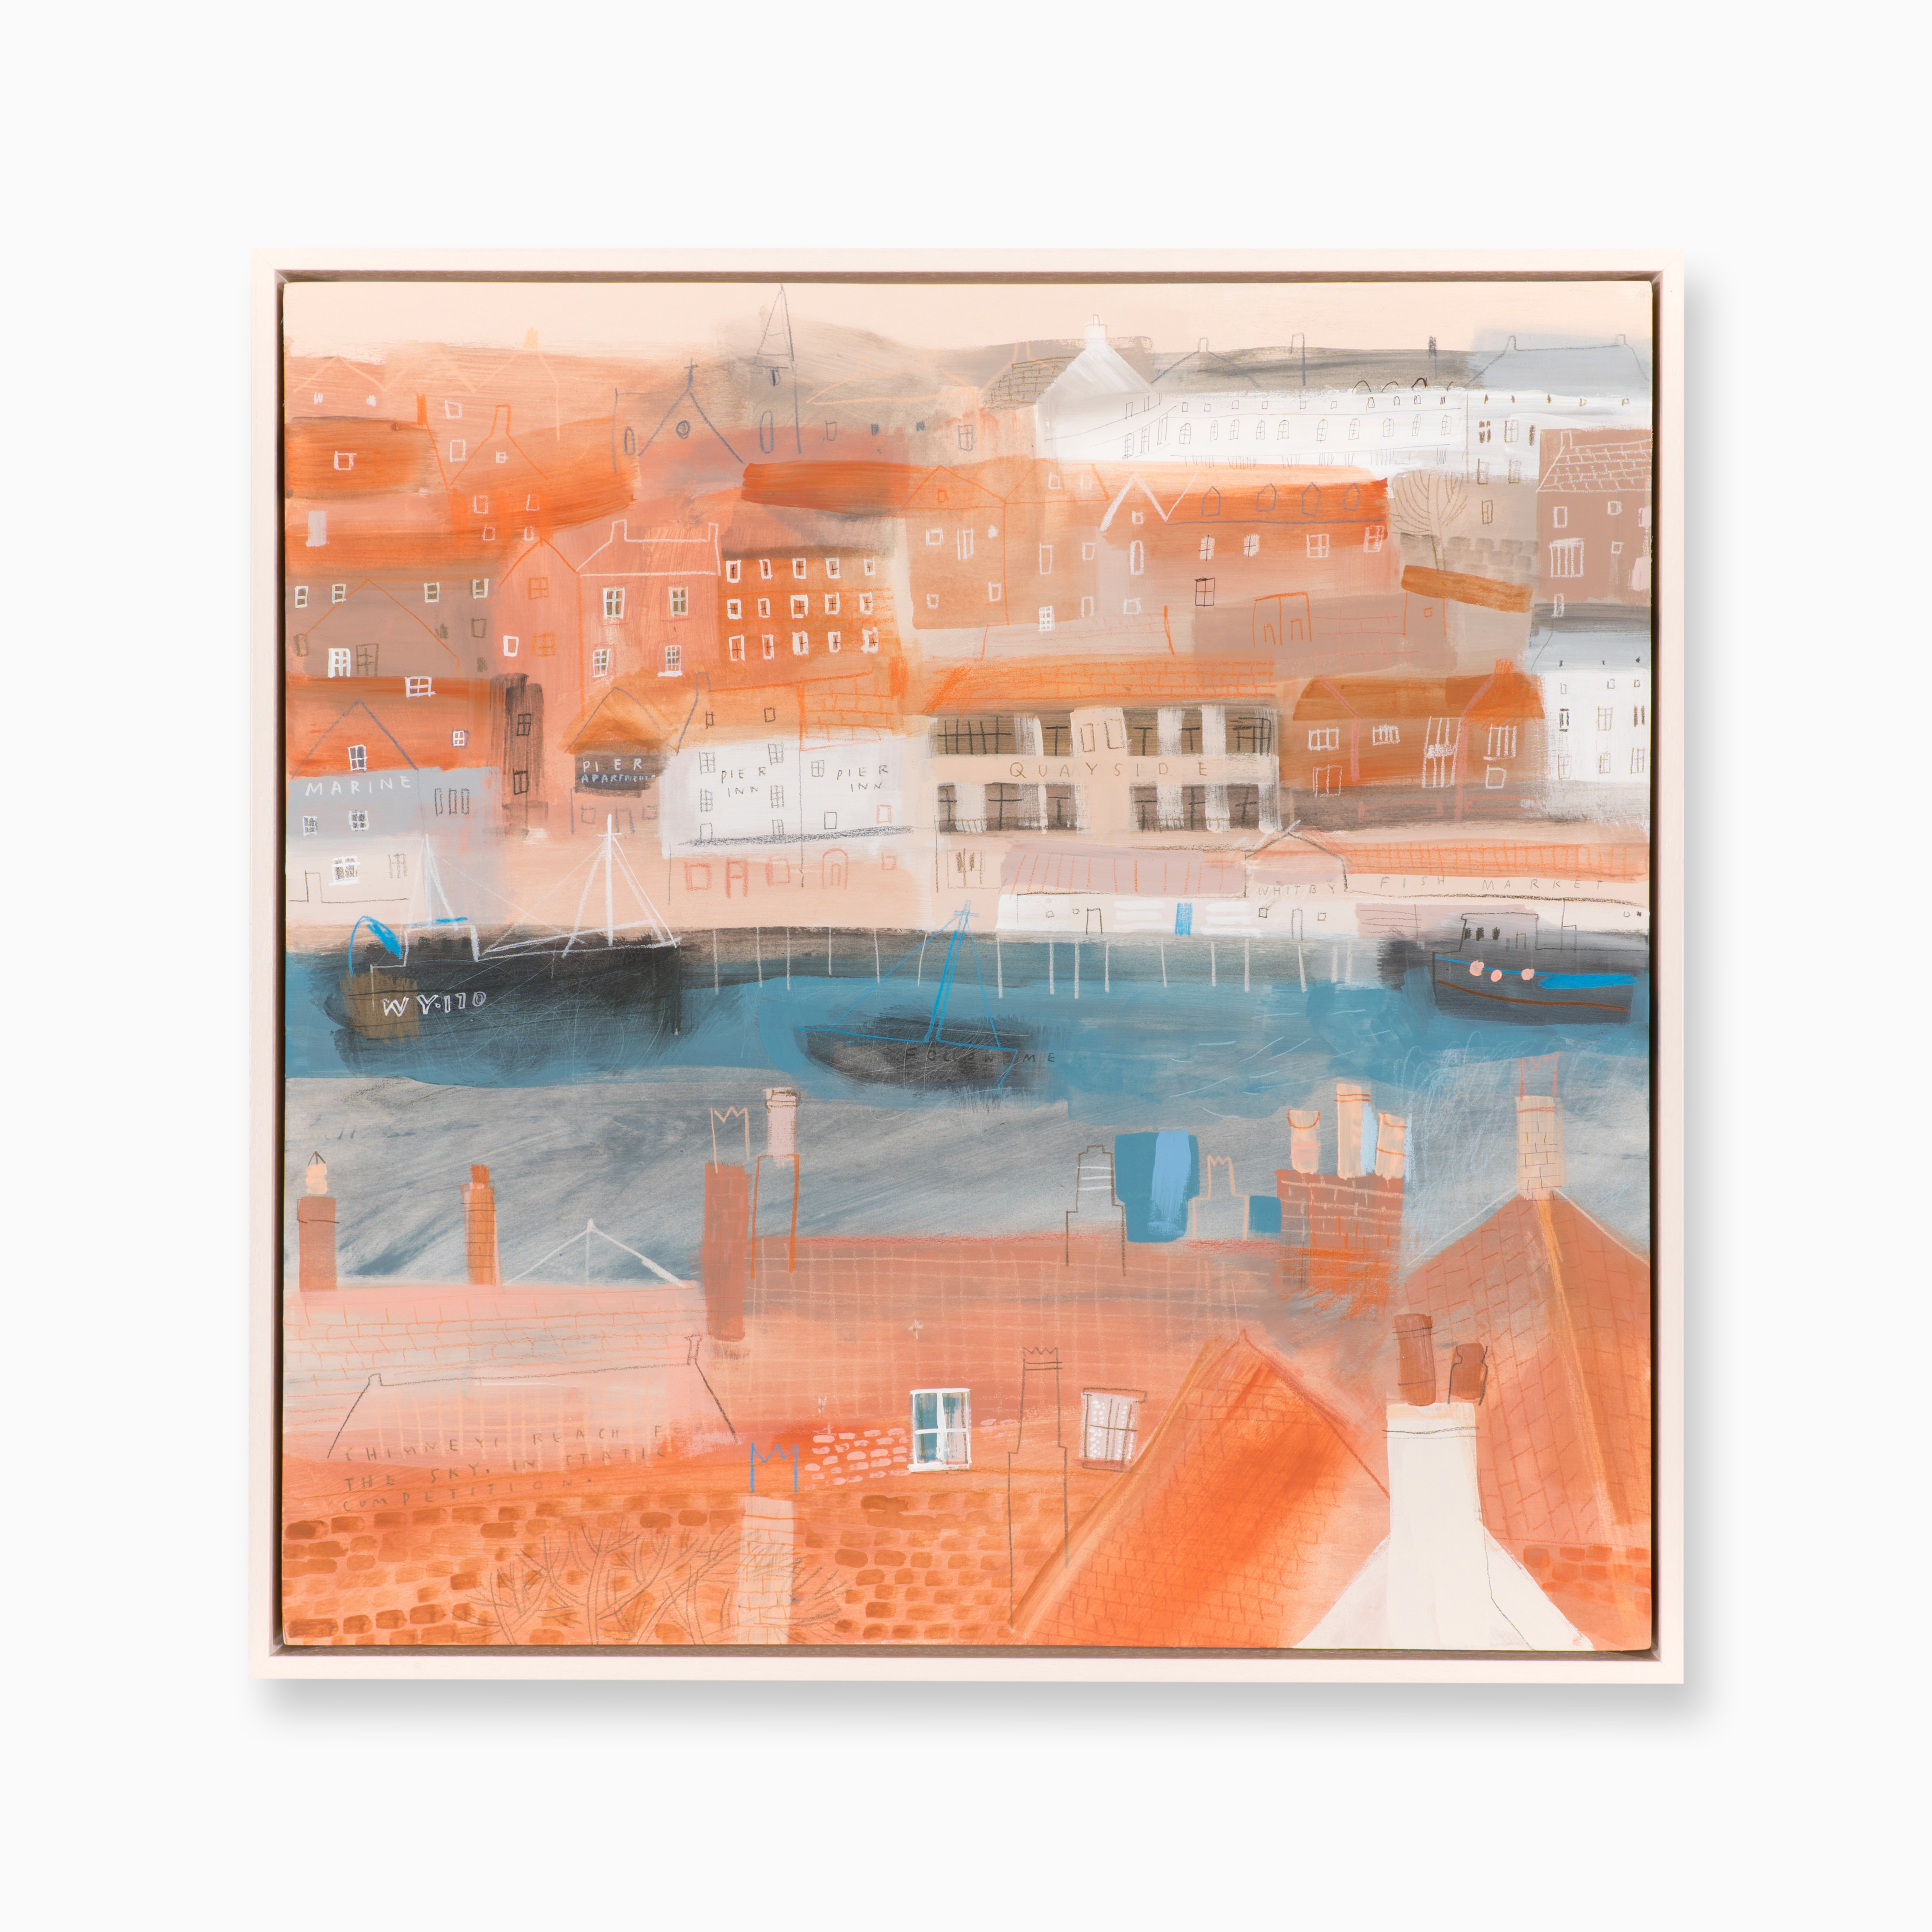 Painting of houses by a quay.